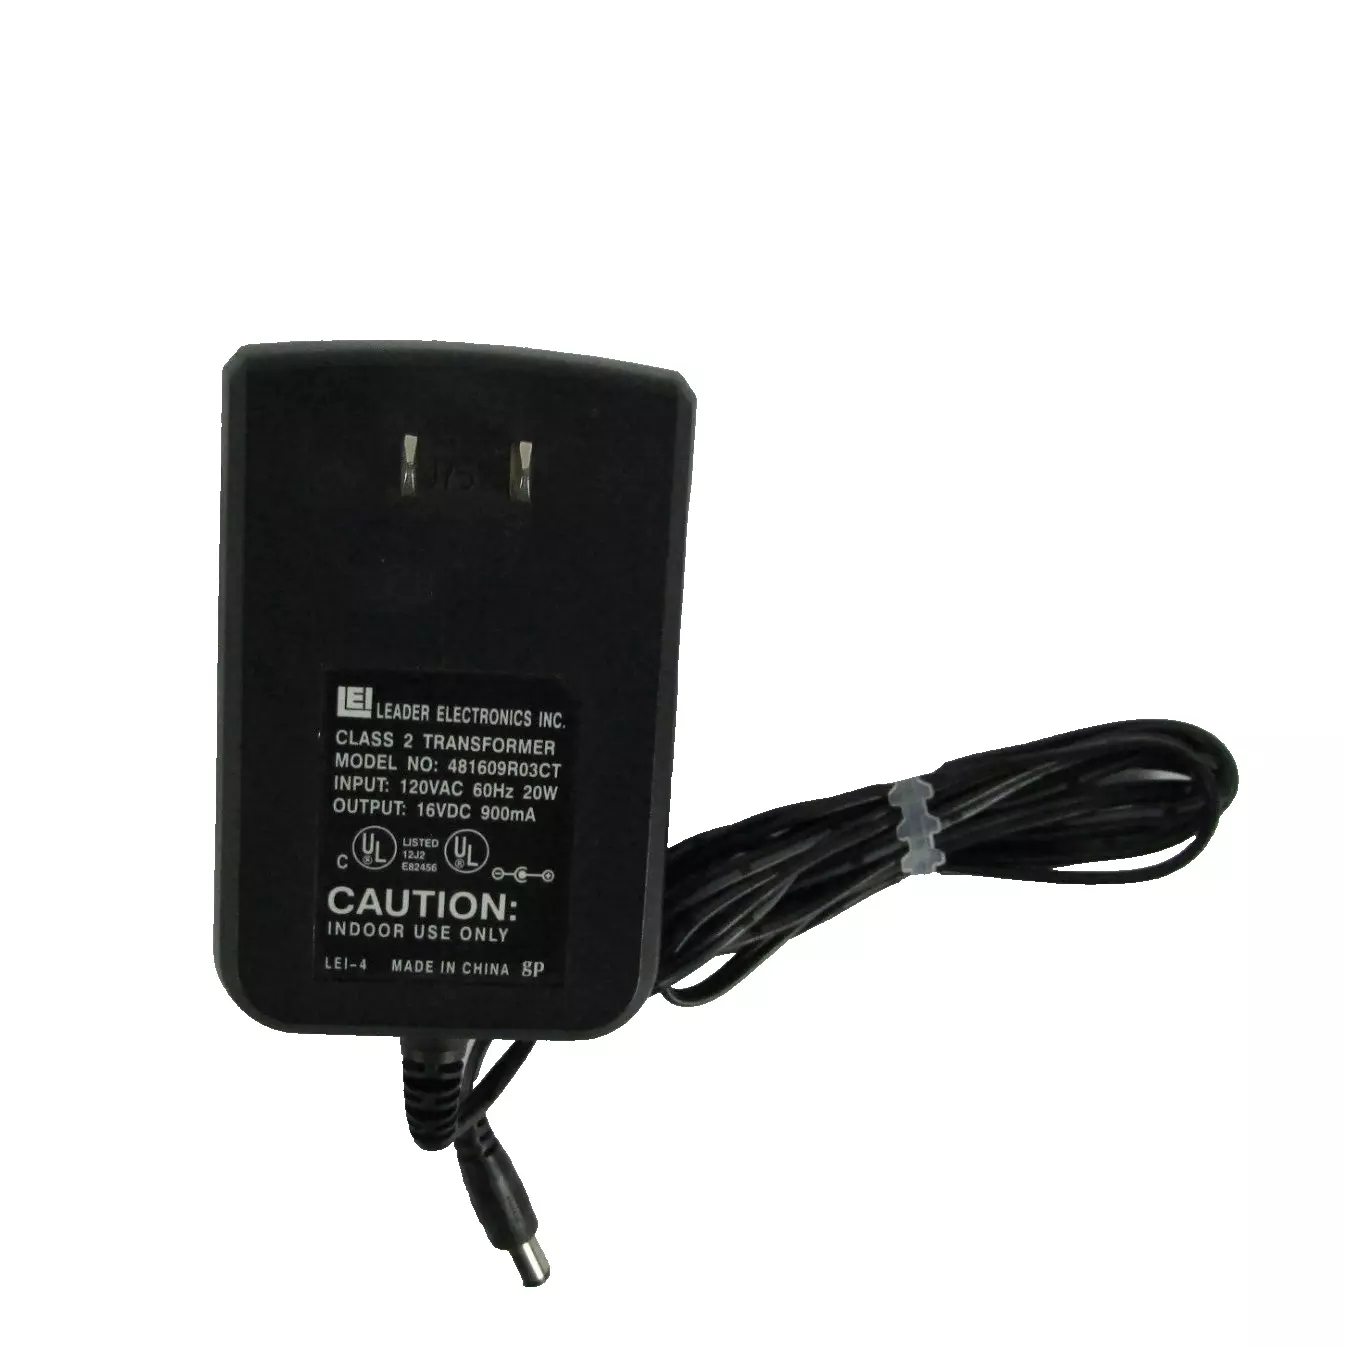 *Brand NEW*LEI Leader Electronics Class 2 Transformer 16VDC 900mA AC Adapter 481609RO3CT Power Supply